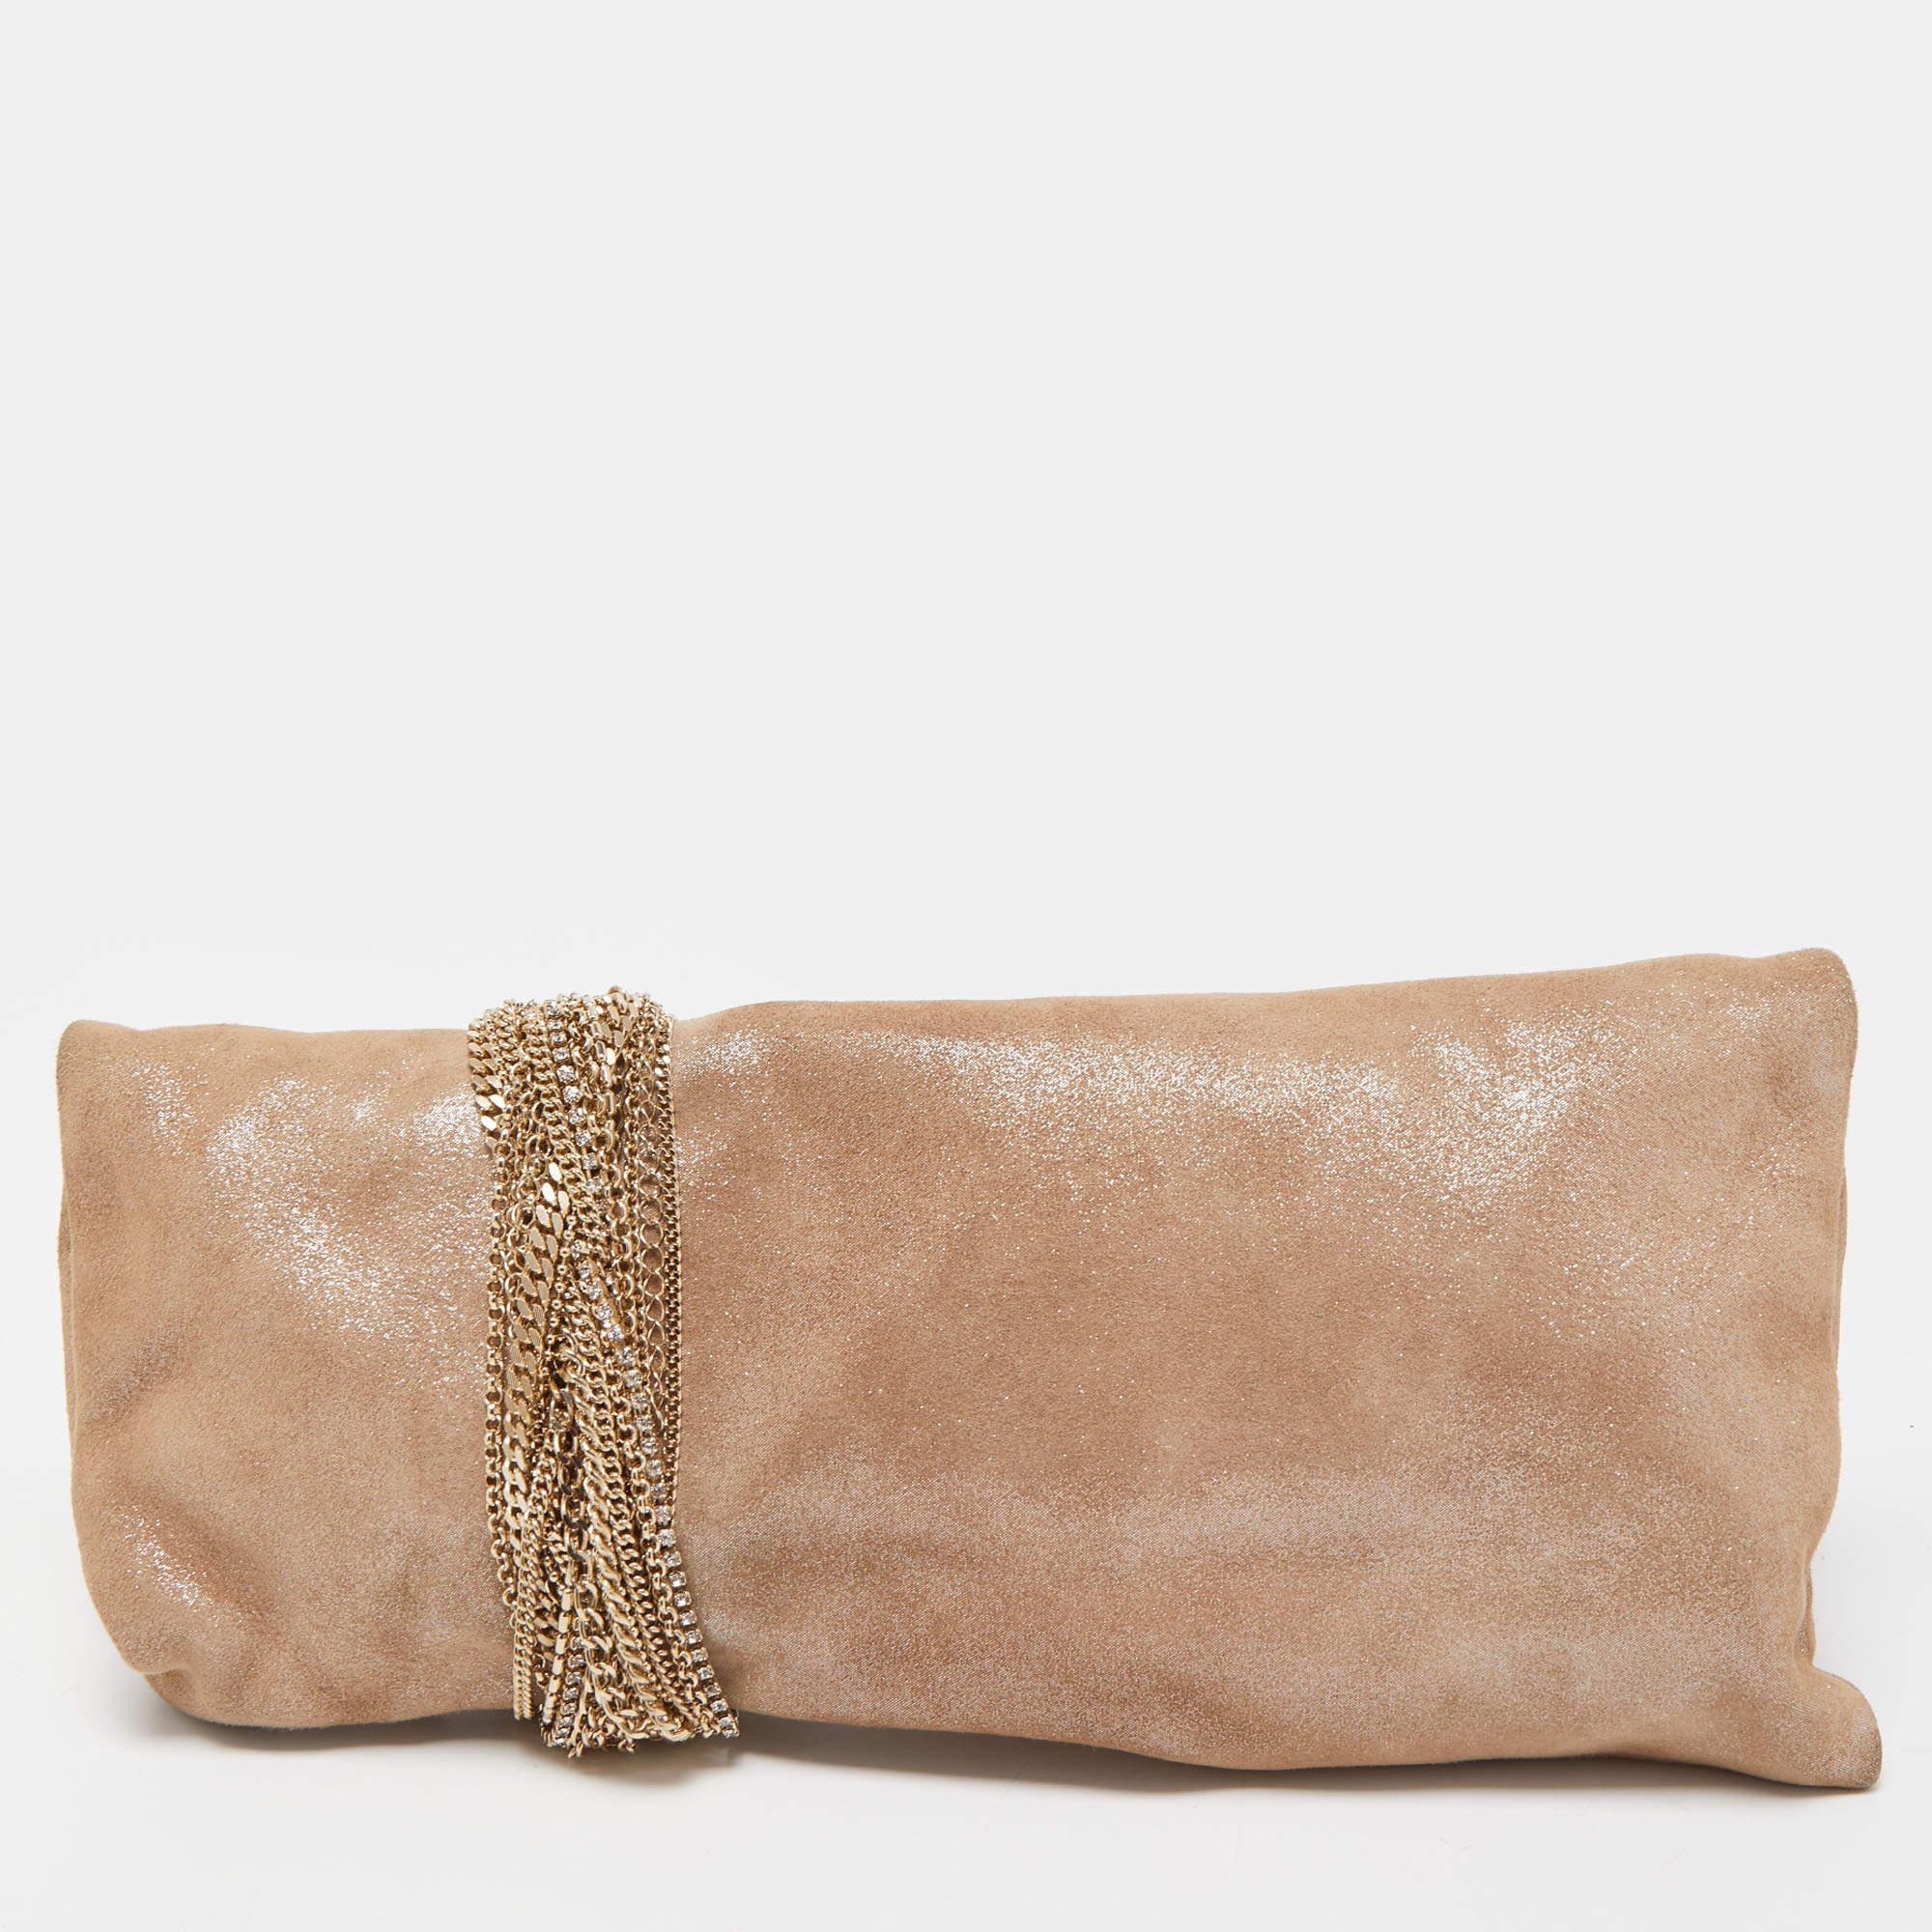 A classy and charming party accessory as attractive as this Chandra clutch will surely highlight your luxe taste in fashion. It is made of shimmering suede and elevated with signature chain detail.

Includes: Original Dustbag, Authenticity Card,